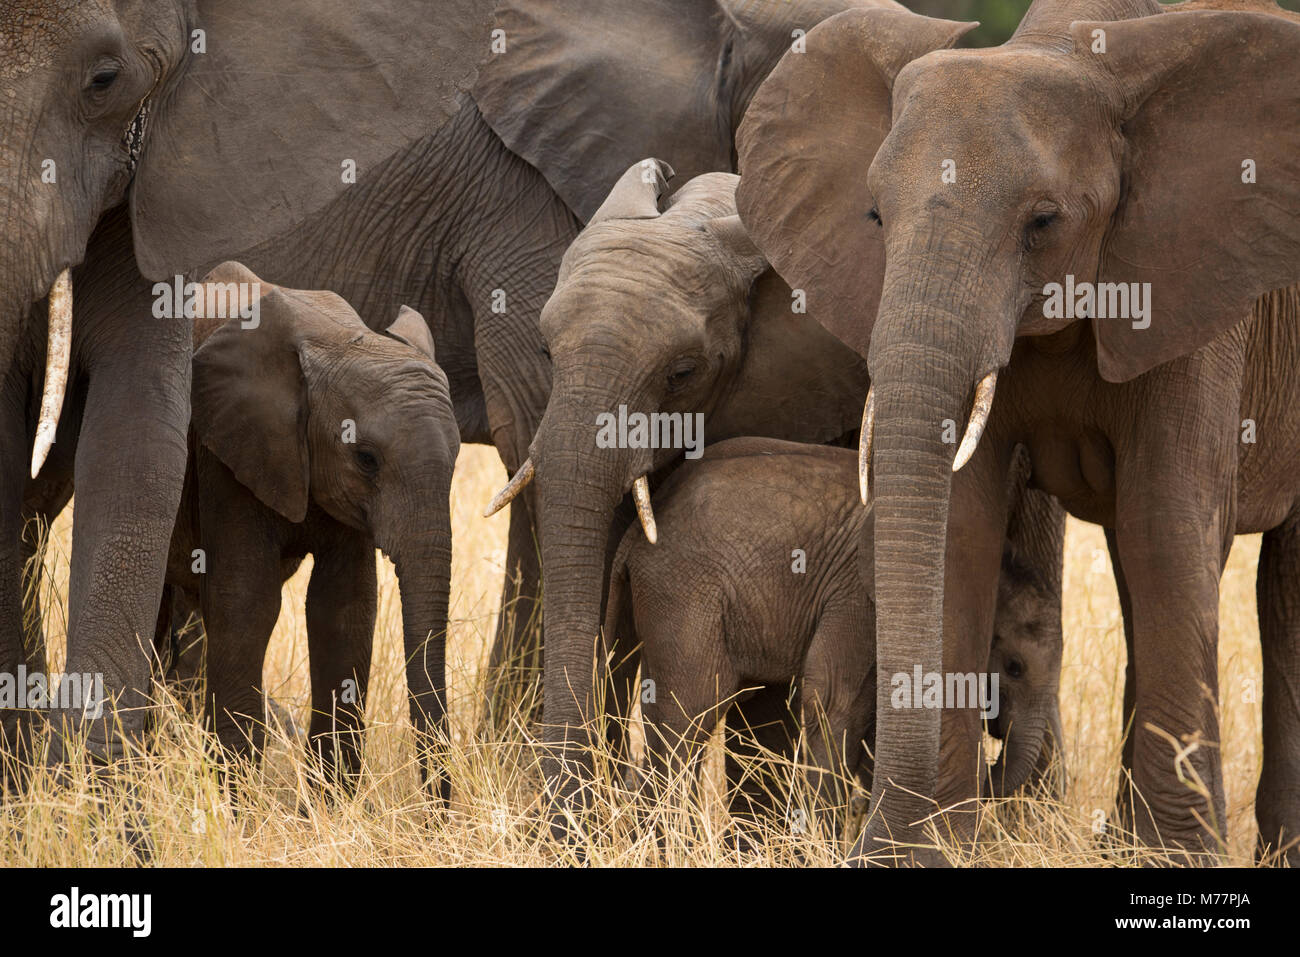 A family of elephants (Loxondonta africana) huddled together with their young in Tarangire National Park, Tanzania, East Africa, Africa Stock Photo